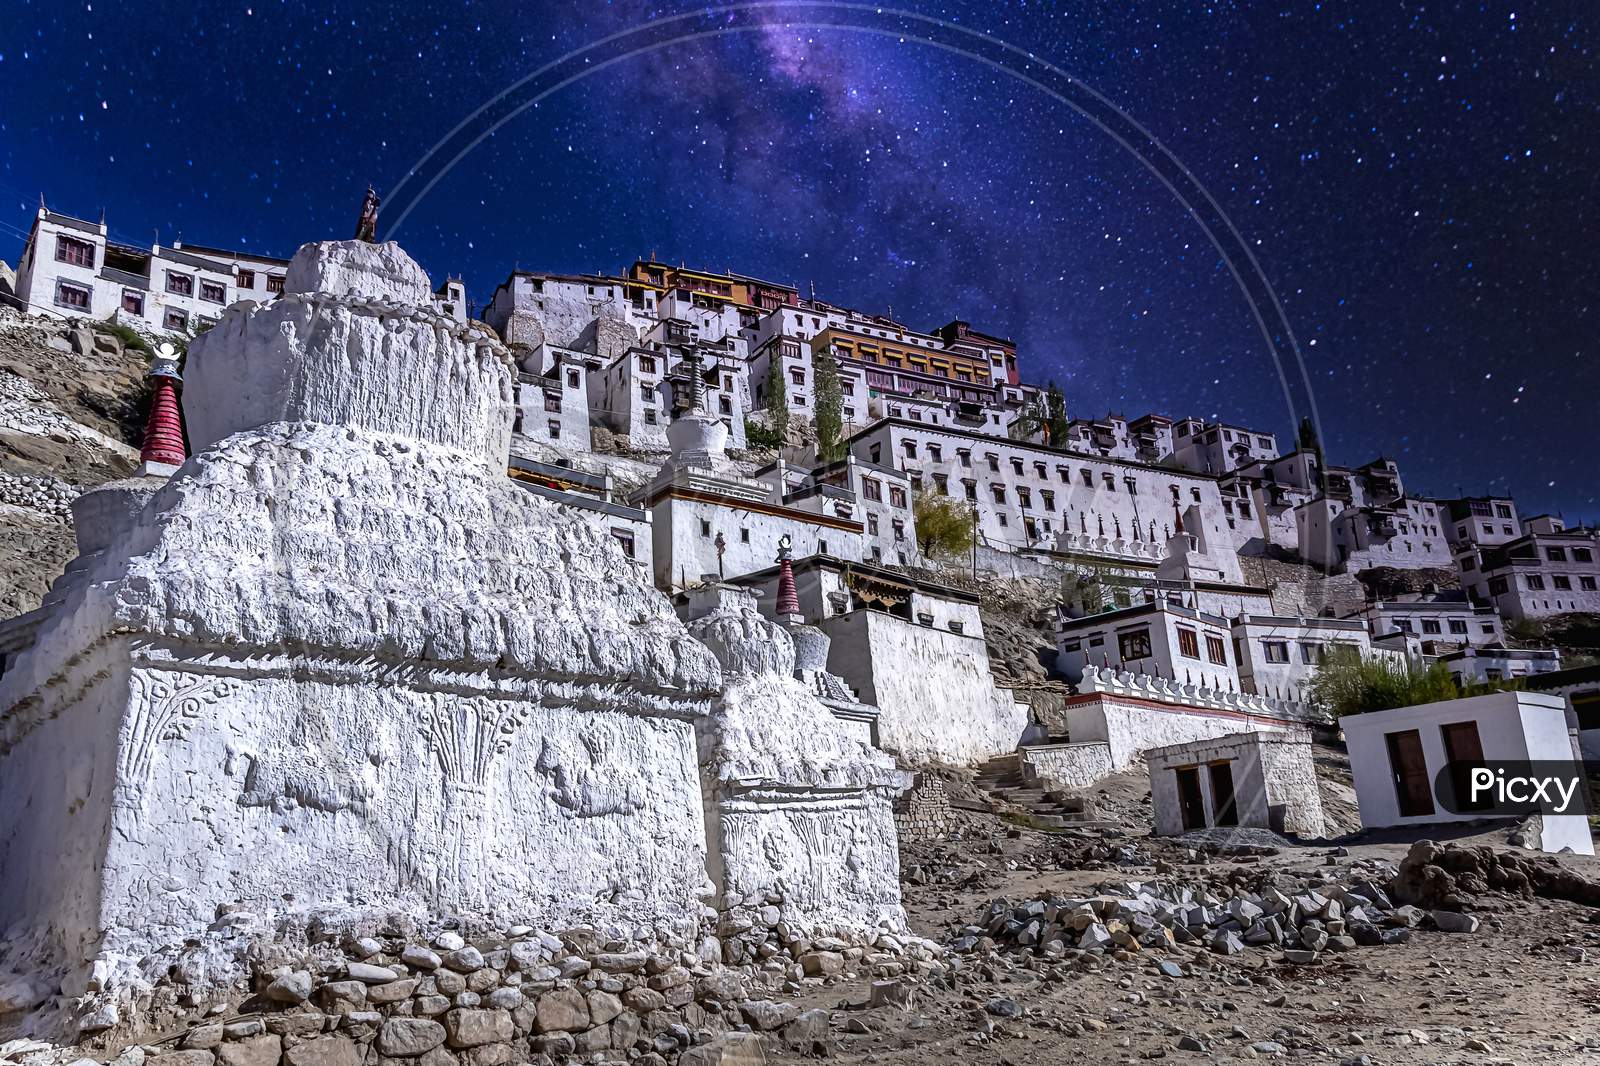 Seen from the Thiksey village you see white painted stupas holding buddhist relics under a starry sky as seen at the Thikse Monastery near Leh city, Ladakh, India